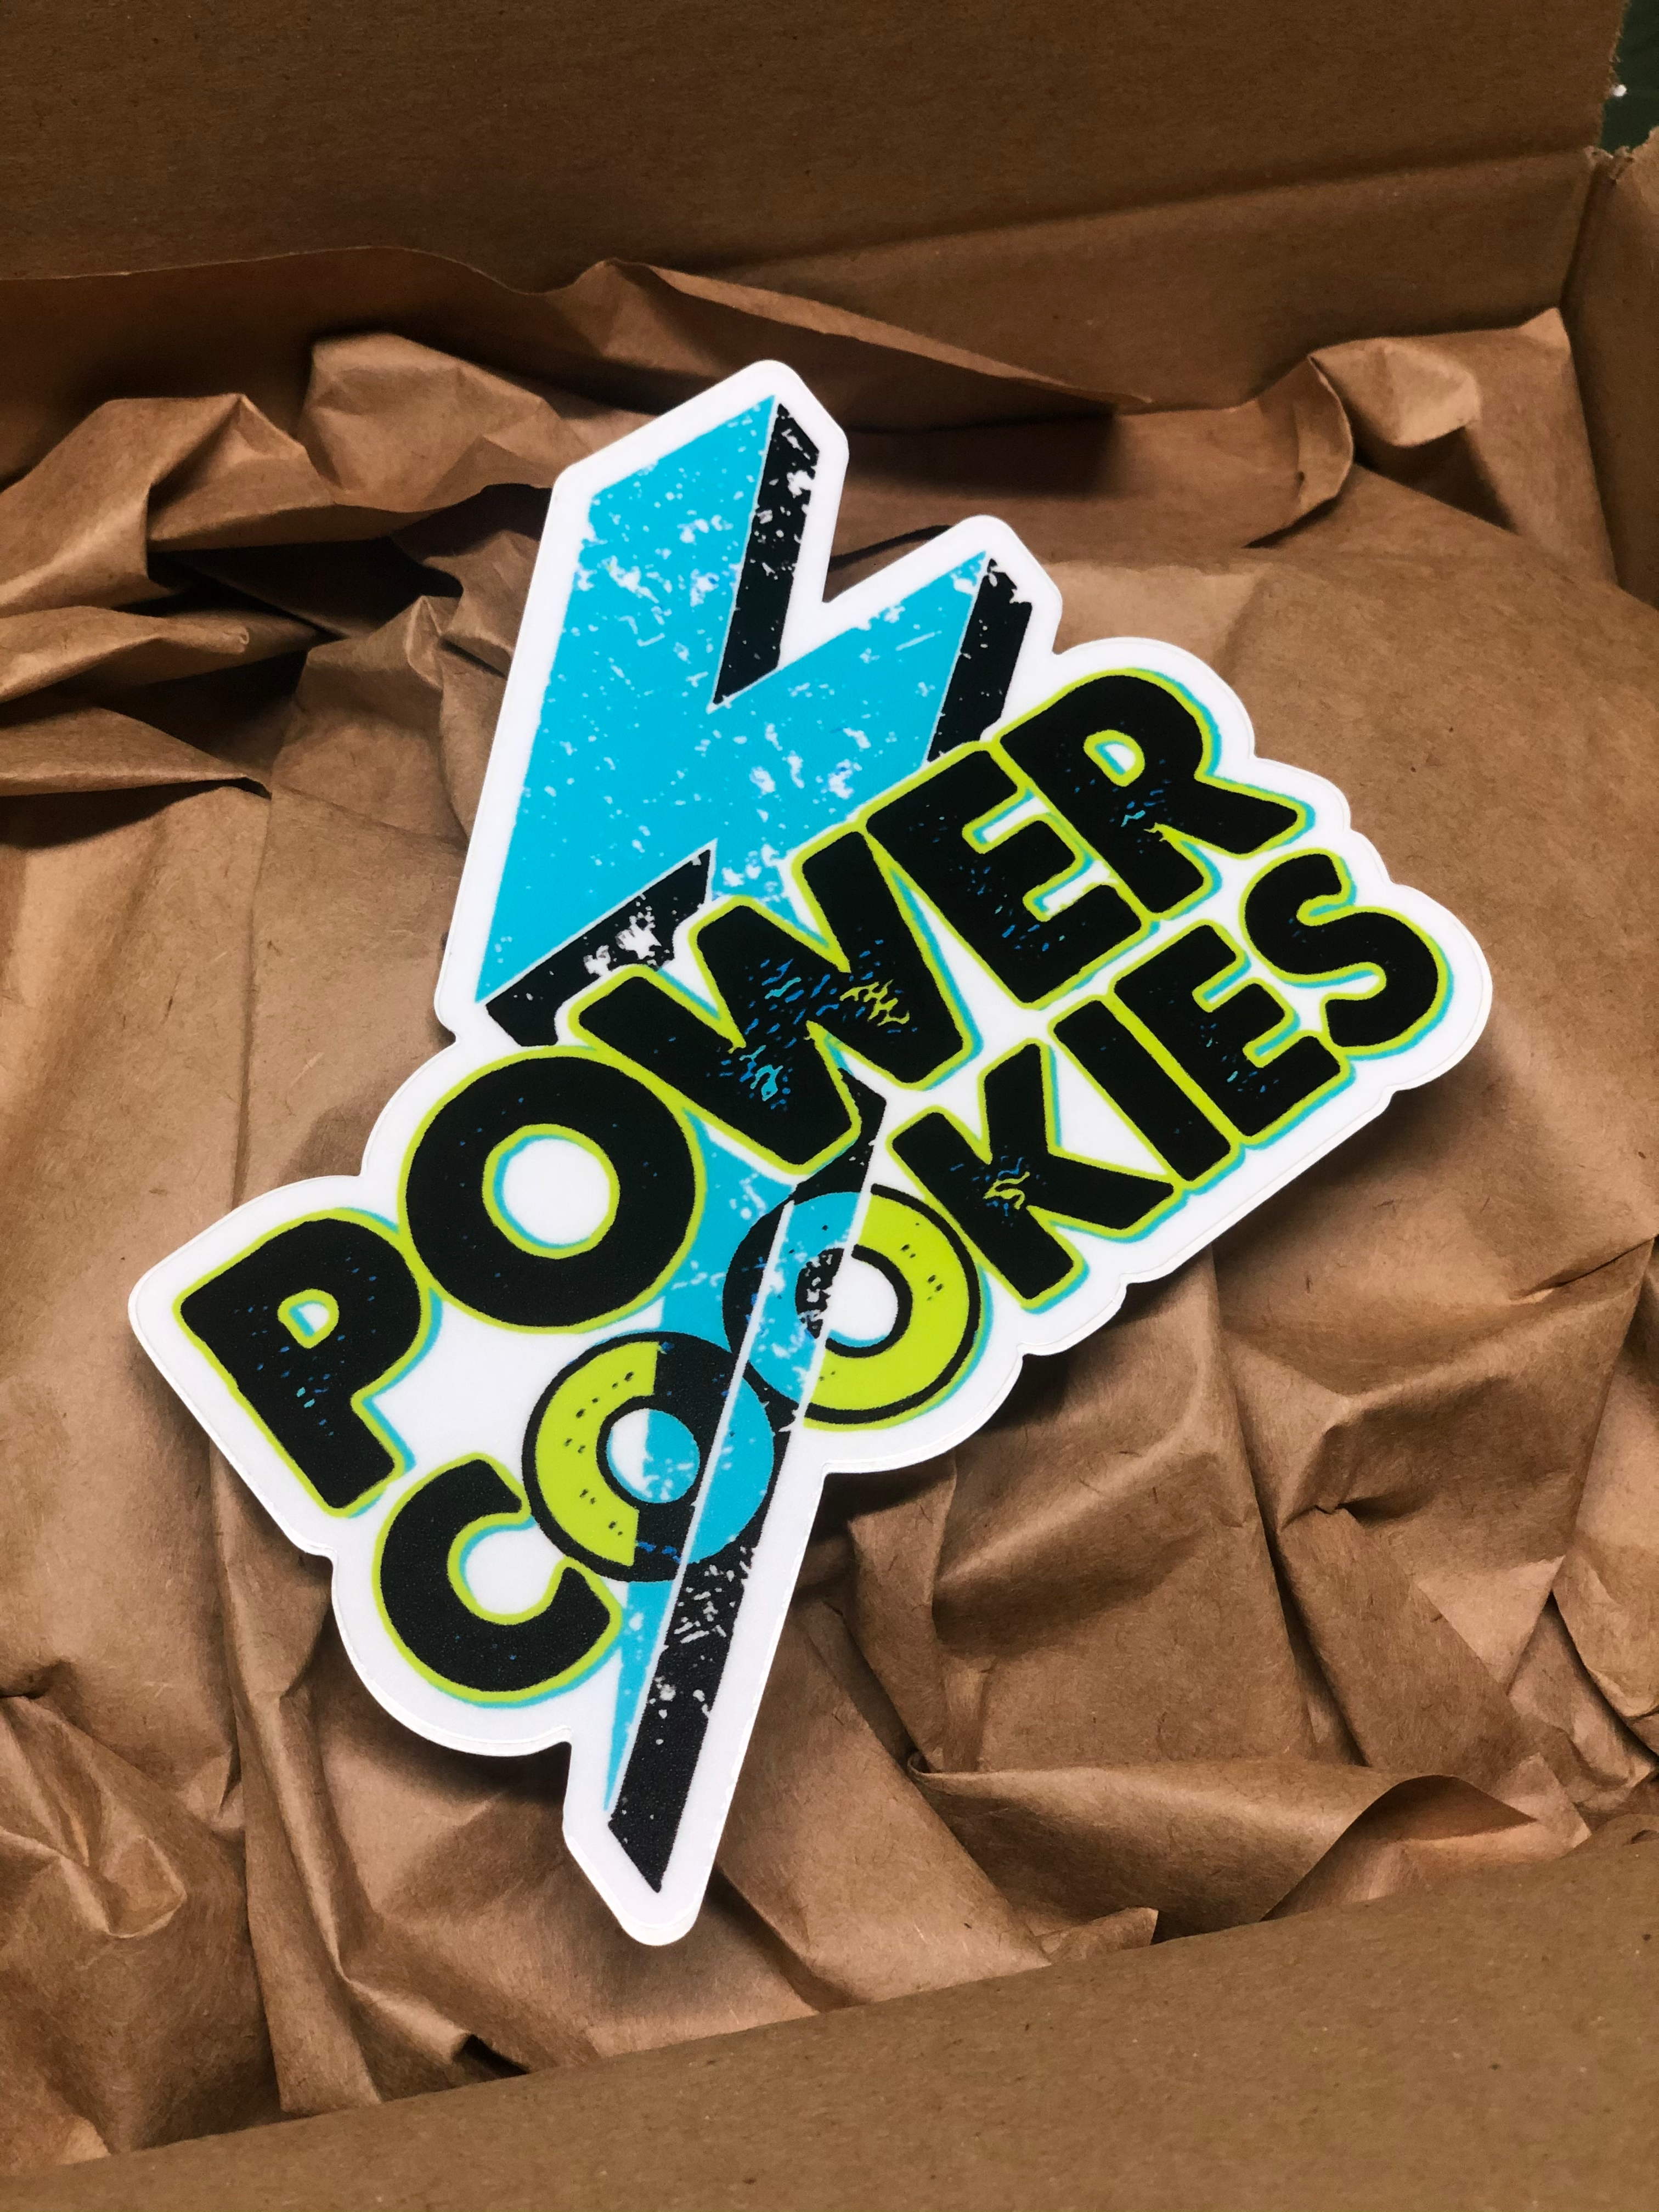 Get a free Power Cookies sticker with every order.